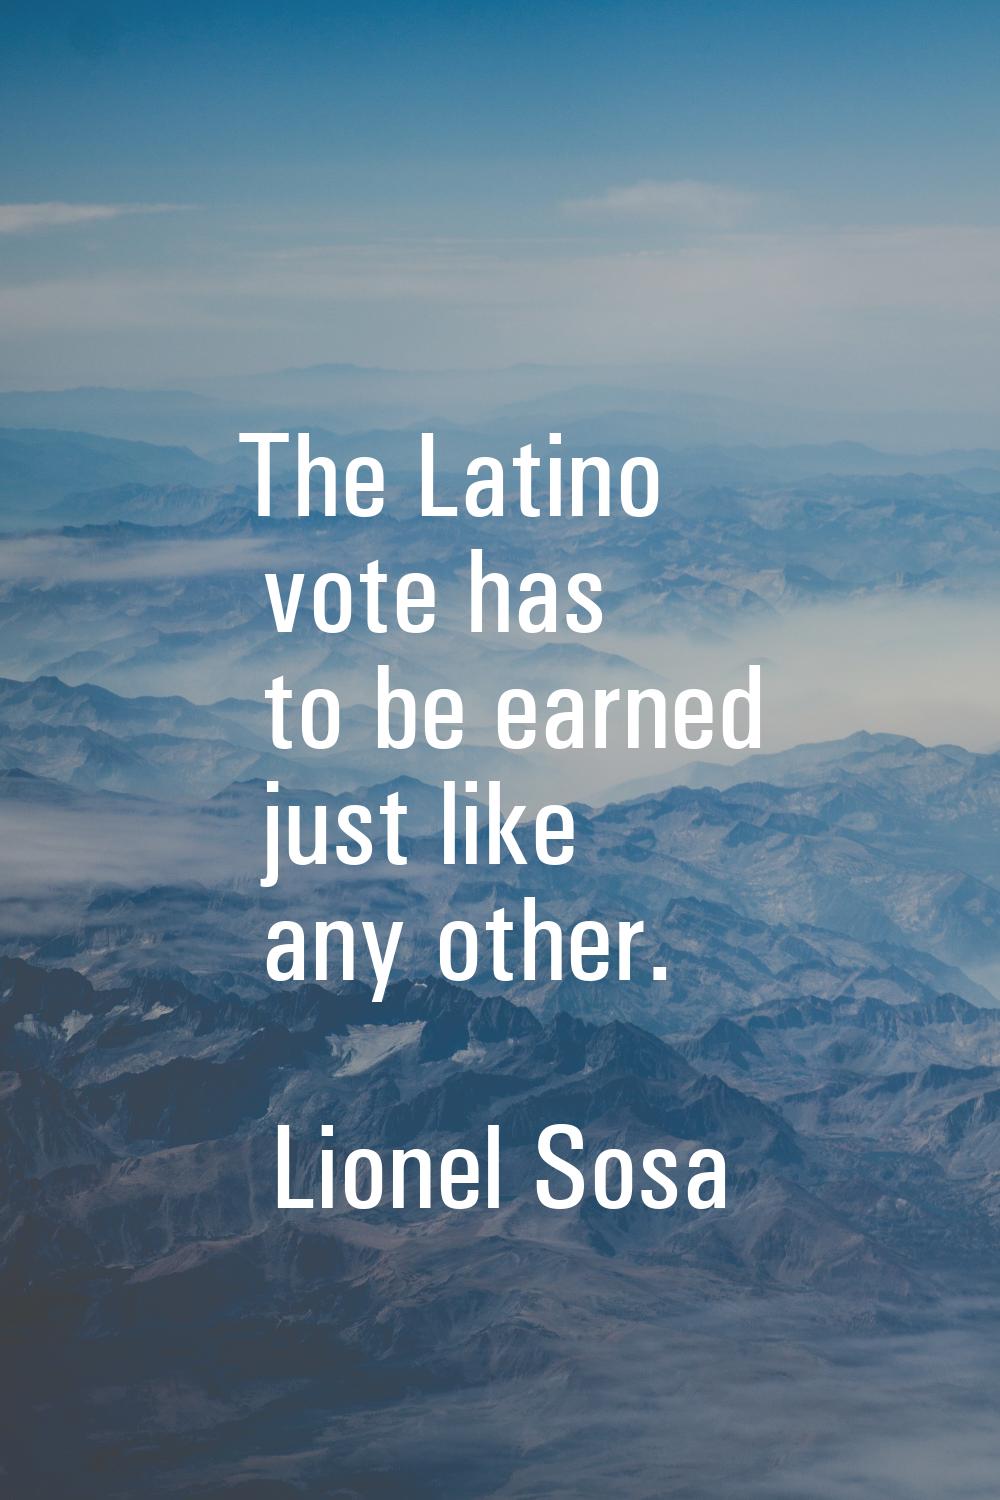 The Latino vote has to be earned just like any other.